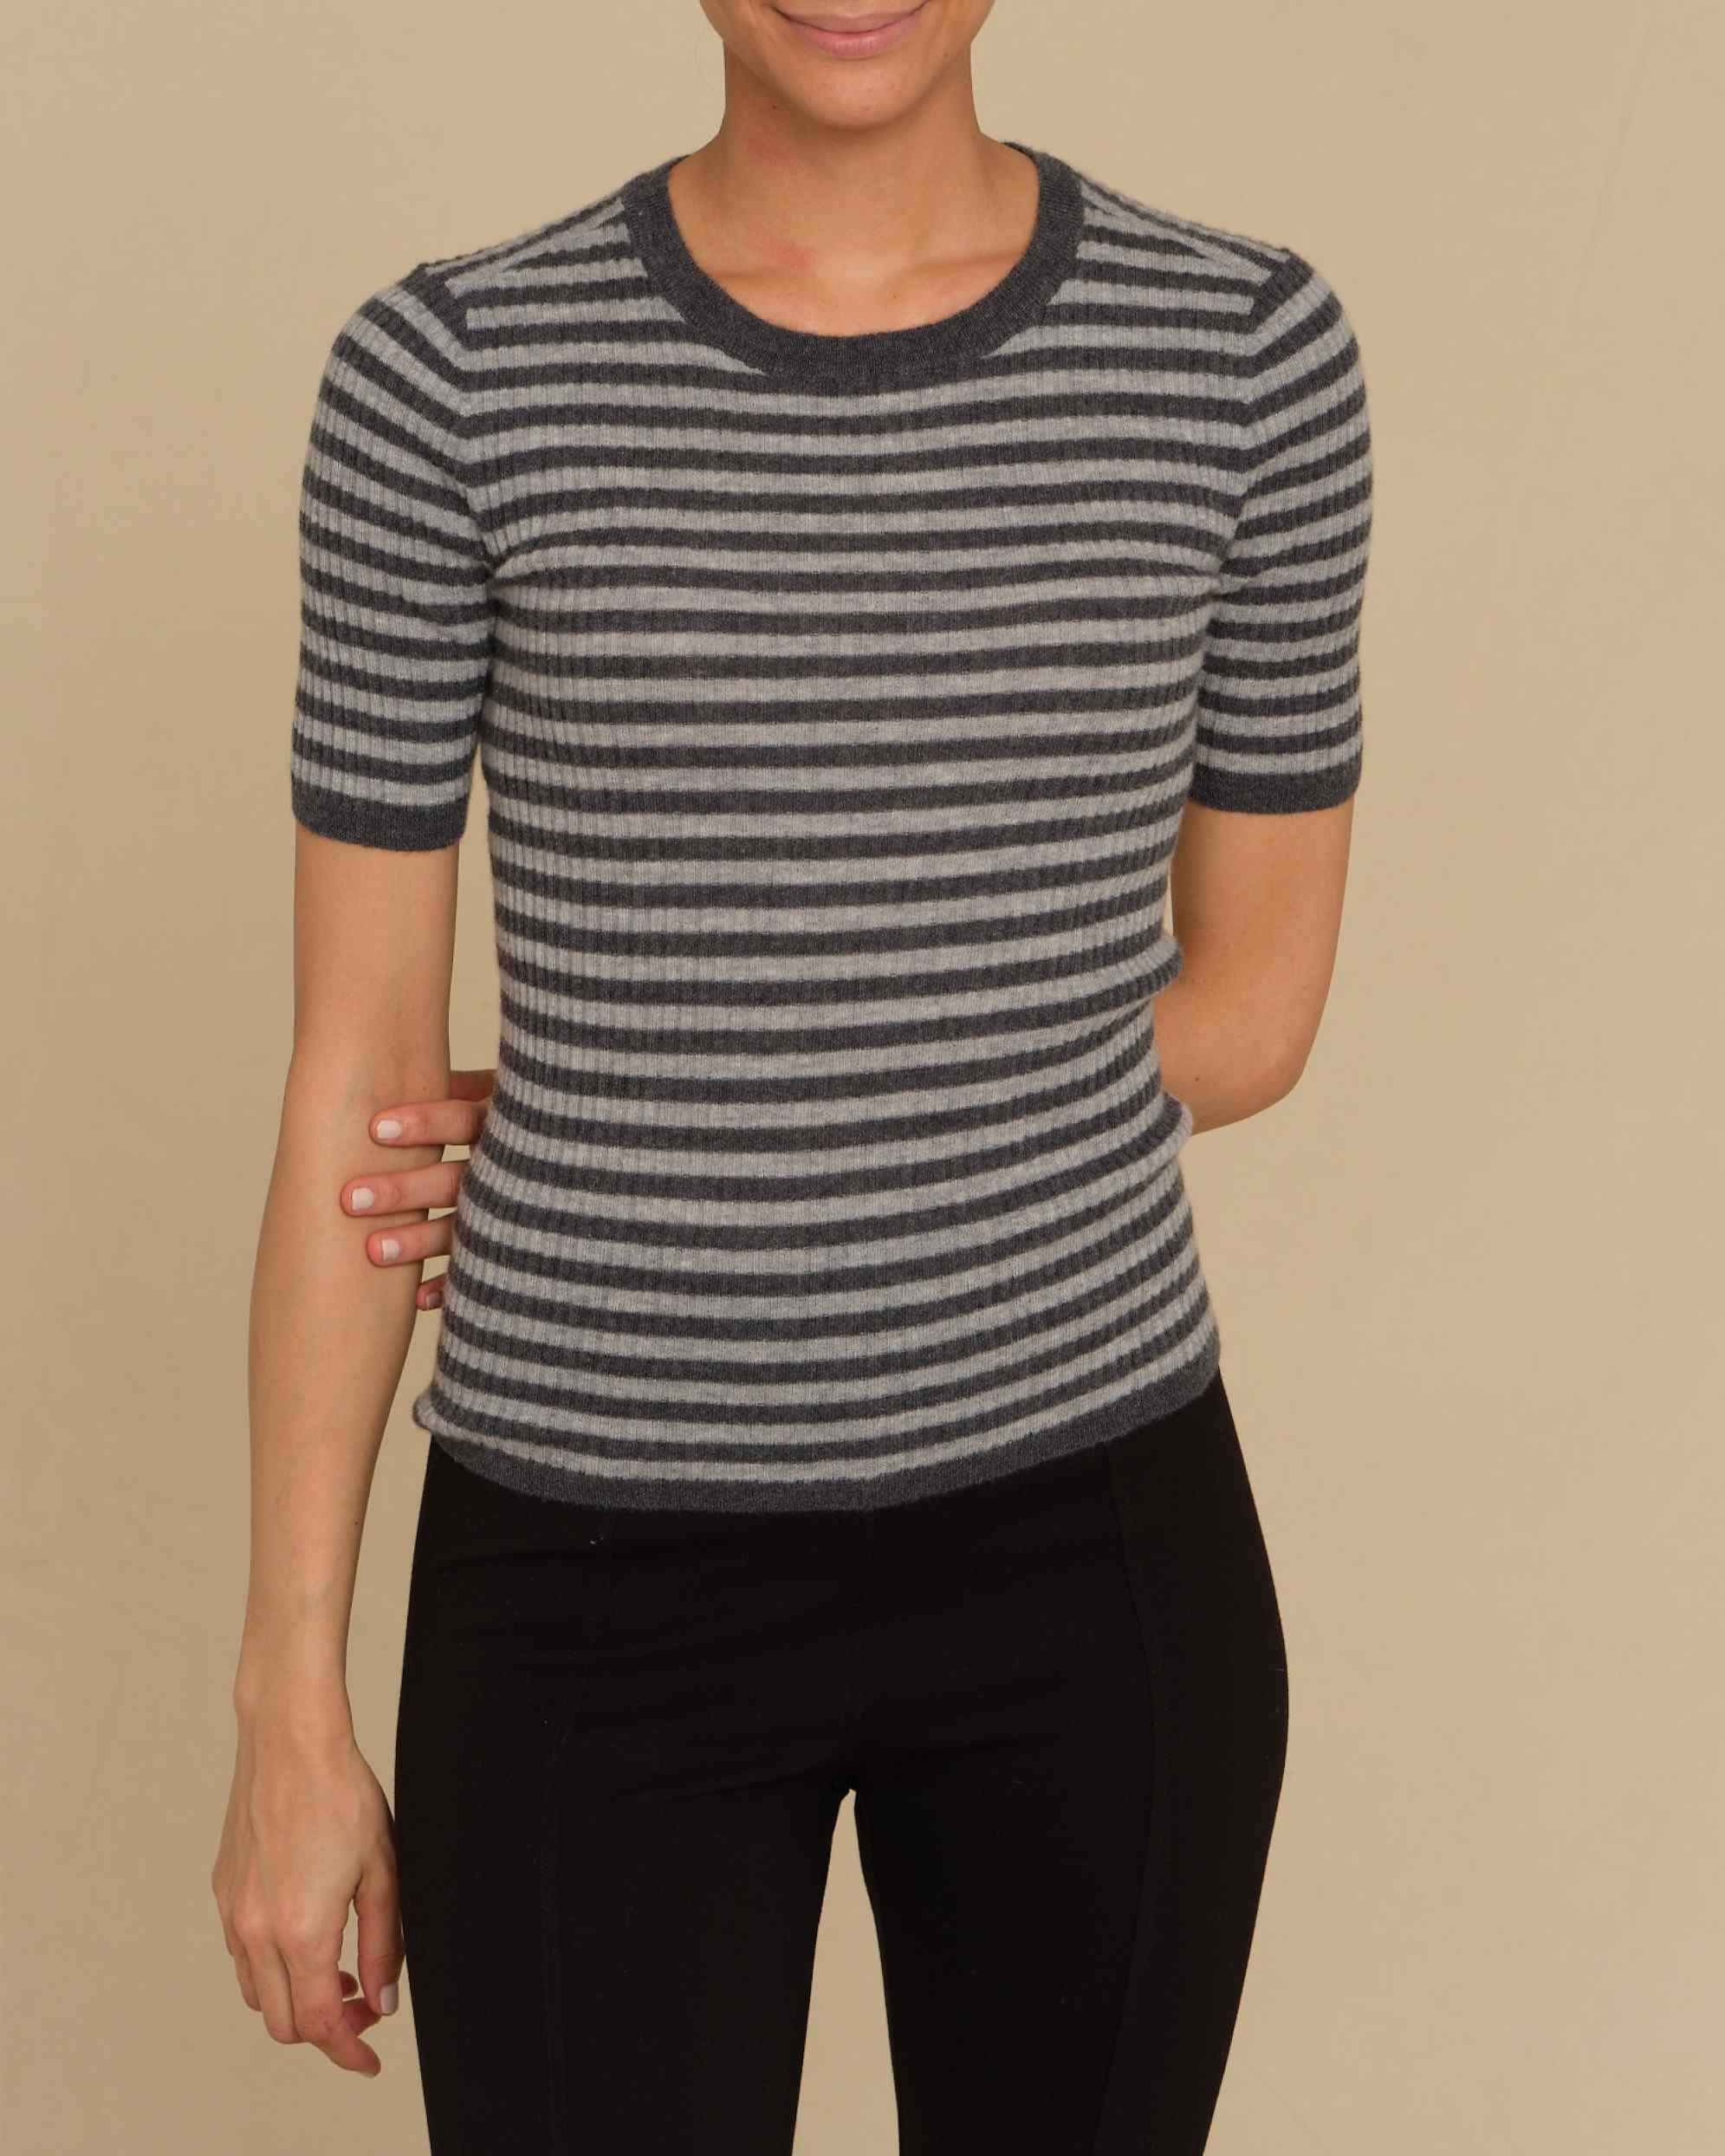 Women's Cashmere Short Sleeve Striped Sweater | The Cashmere Project | JANE + MERCER